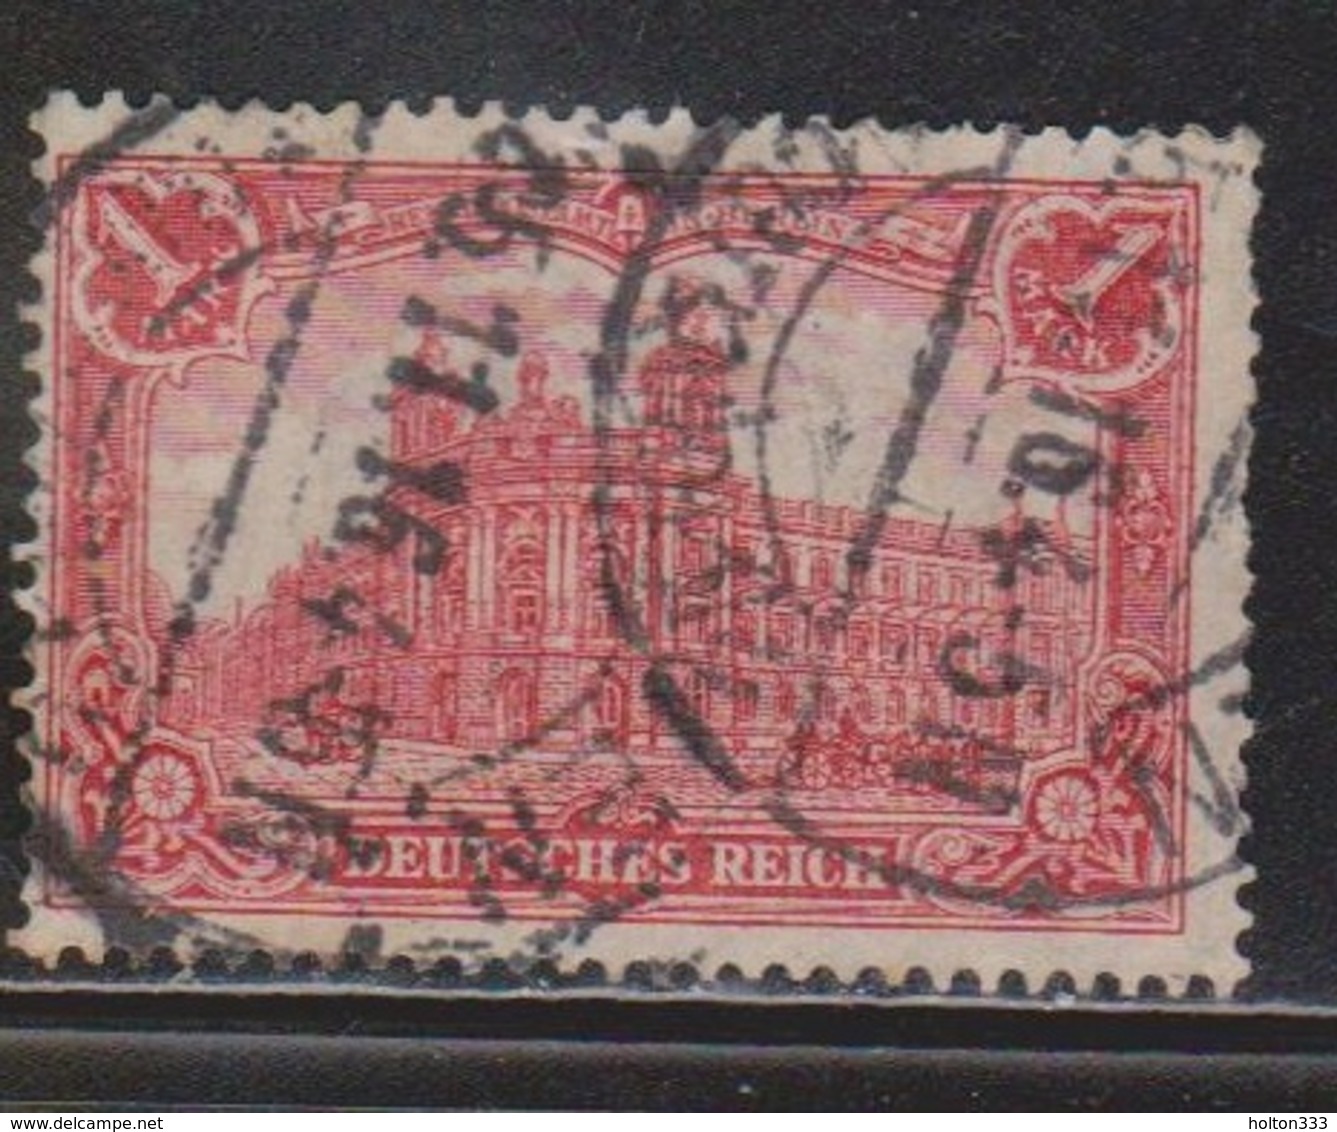 GERMANY Scott # 75 Used - Used Stamps